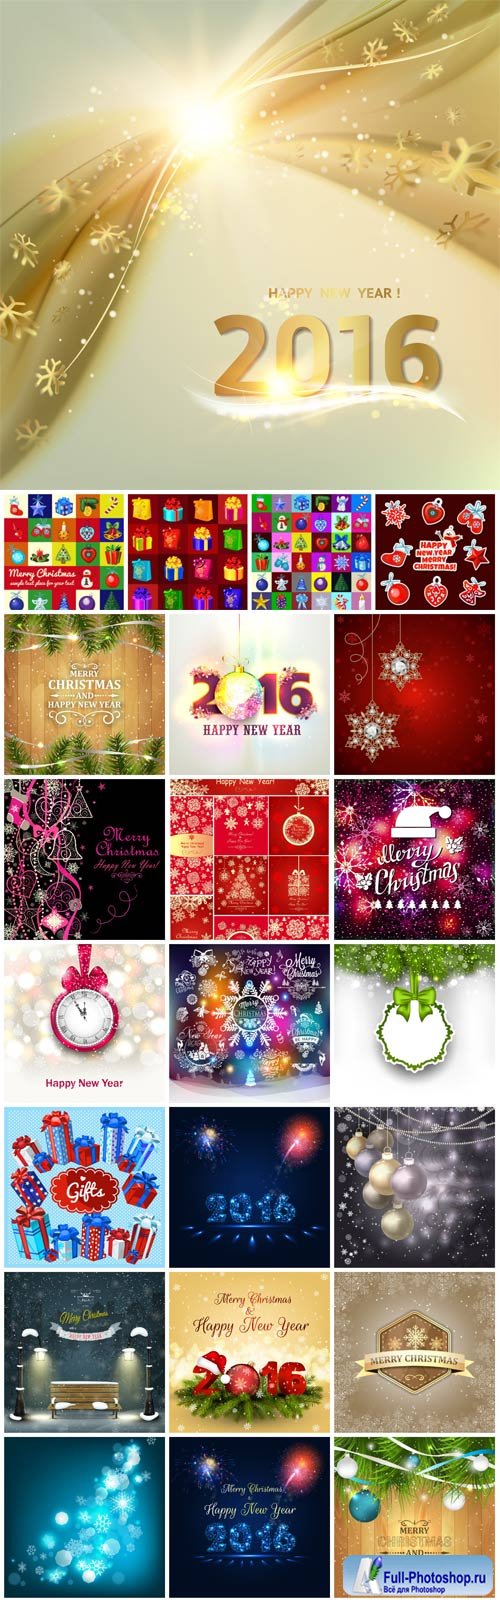 2016 Merry Christmas, New Year, holiday, backgrounds vector #2